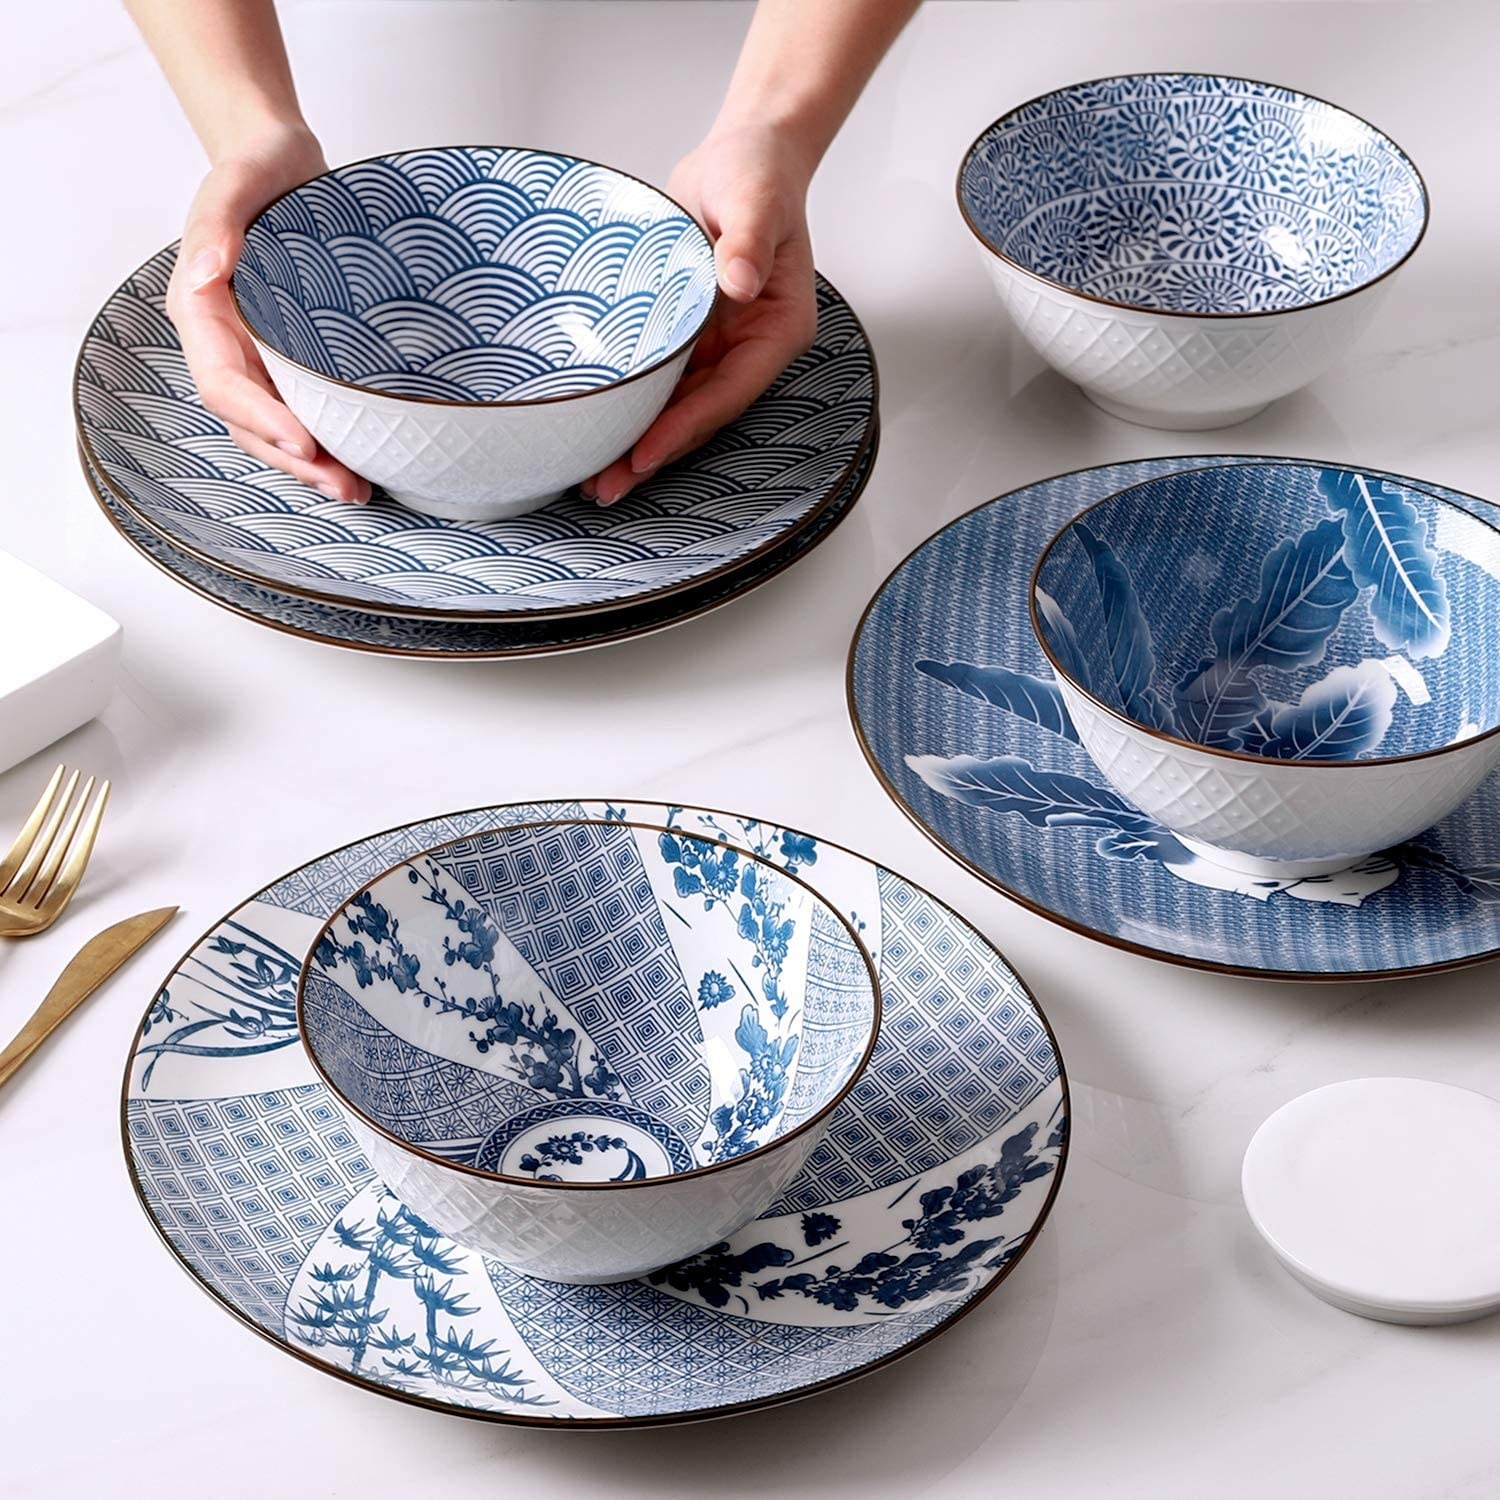 Four bowls on matching plates, a person is holding on